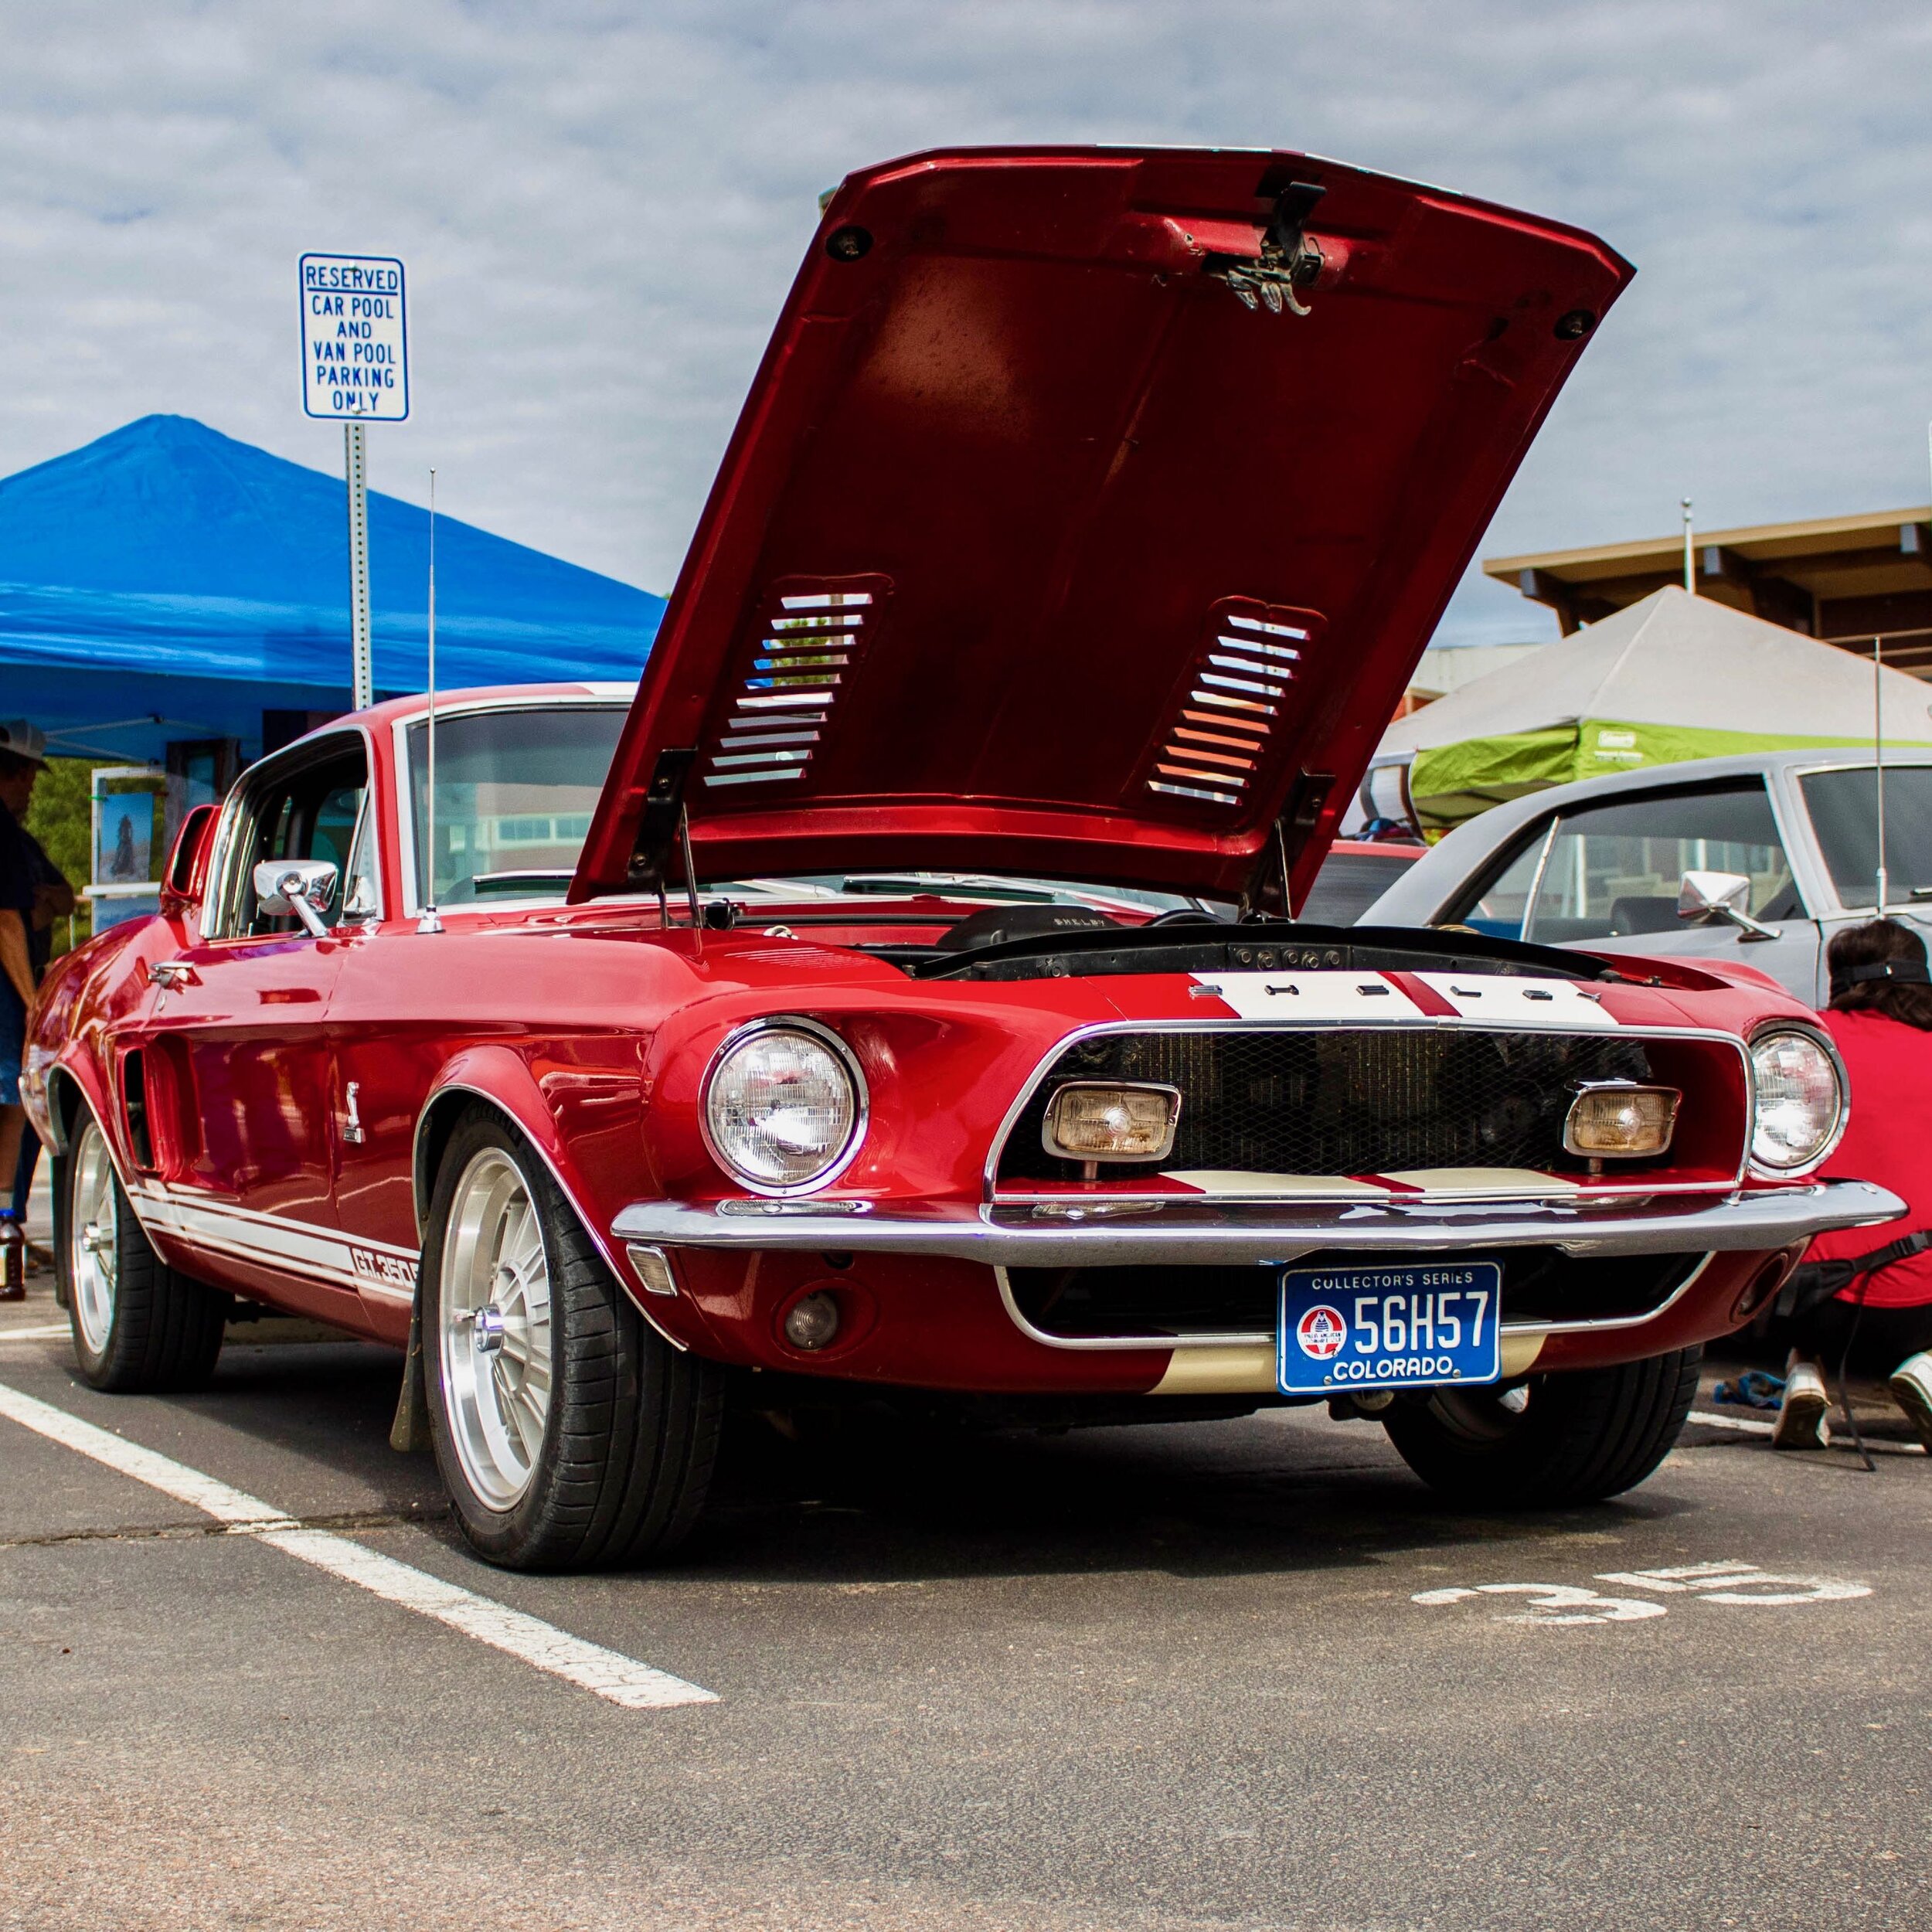 HI-TEST-Motor-Show-2019-FORD-SHELBY-GT350-1968